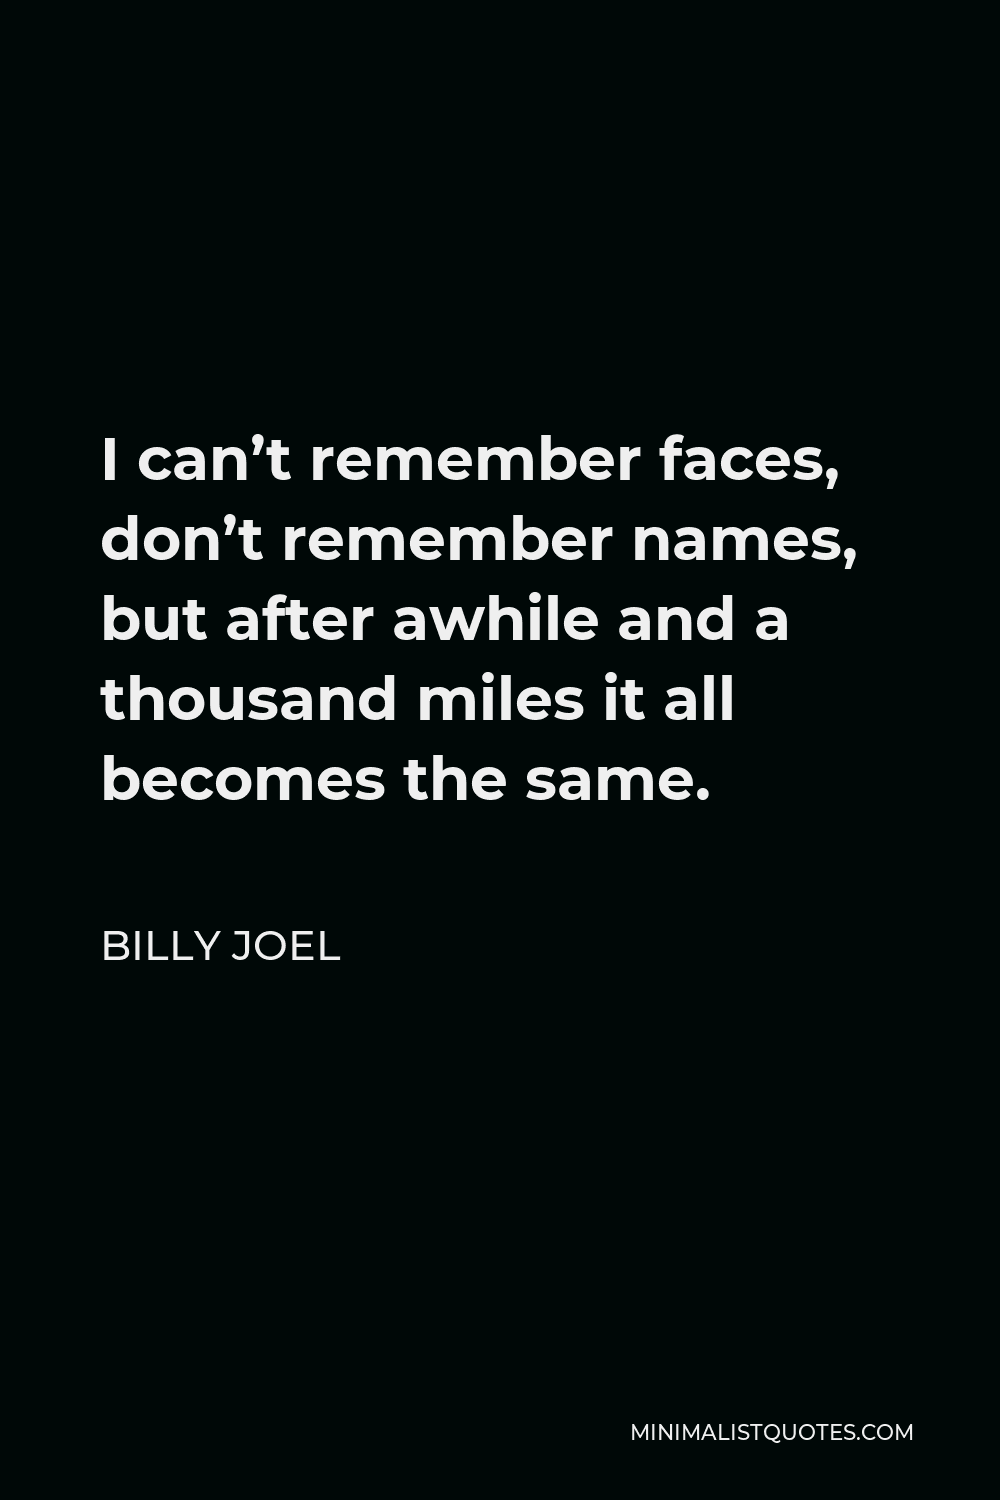 Billy Joel Quote - I can’t remember faces, don’t remember names, but after awhile and a thousand miles it all becomes the same.